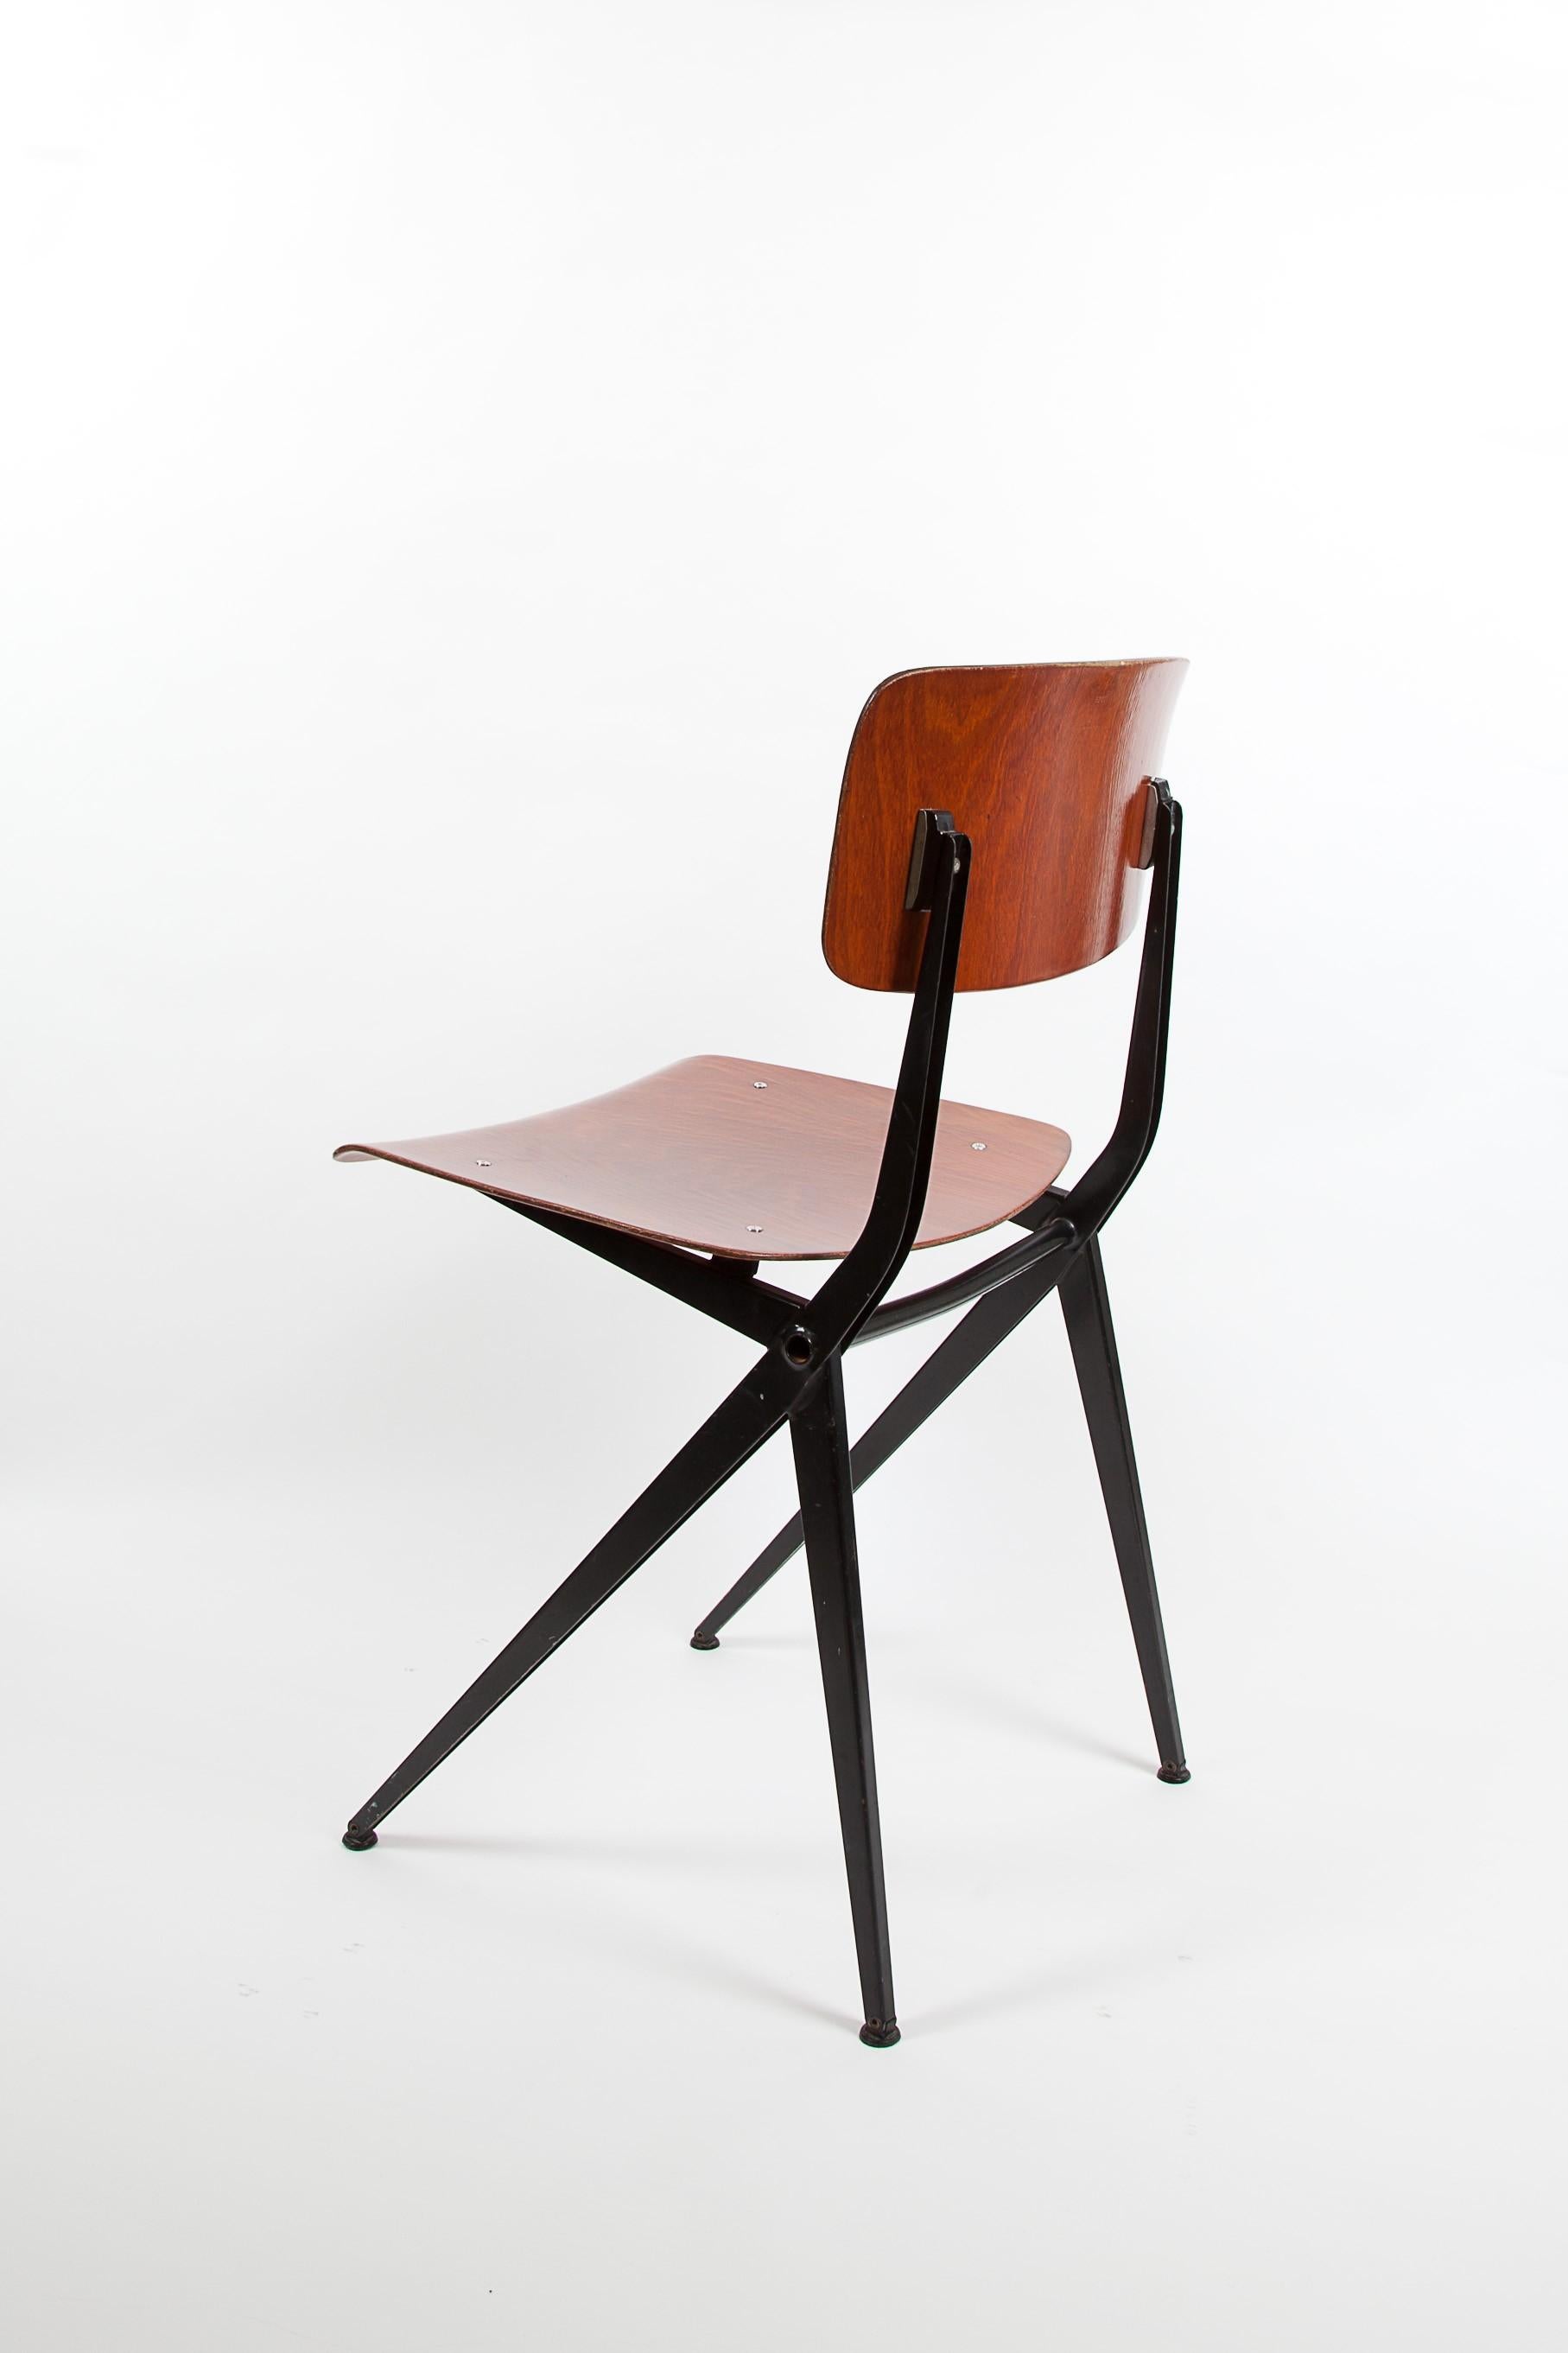 Mid-20th Century 1 of 32 Dutch Marko Industrial Friso Kramer Design Dining Chairs Compass 1950